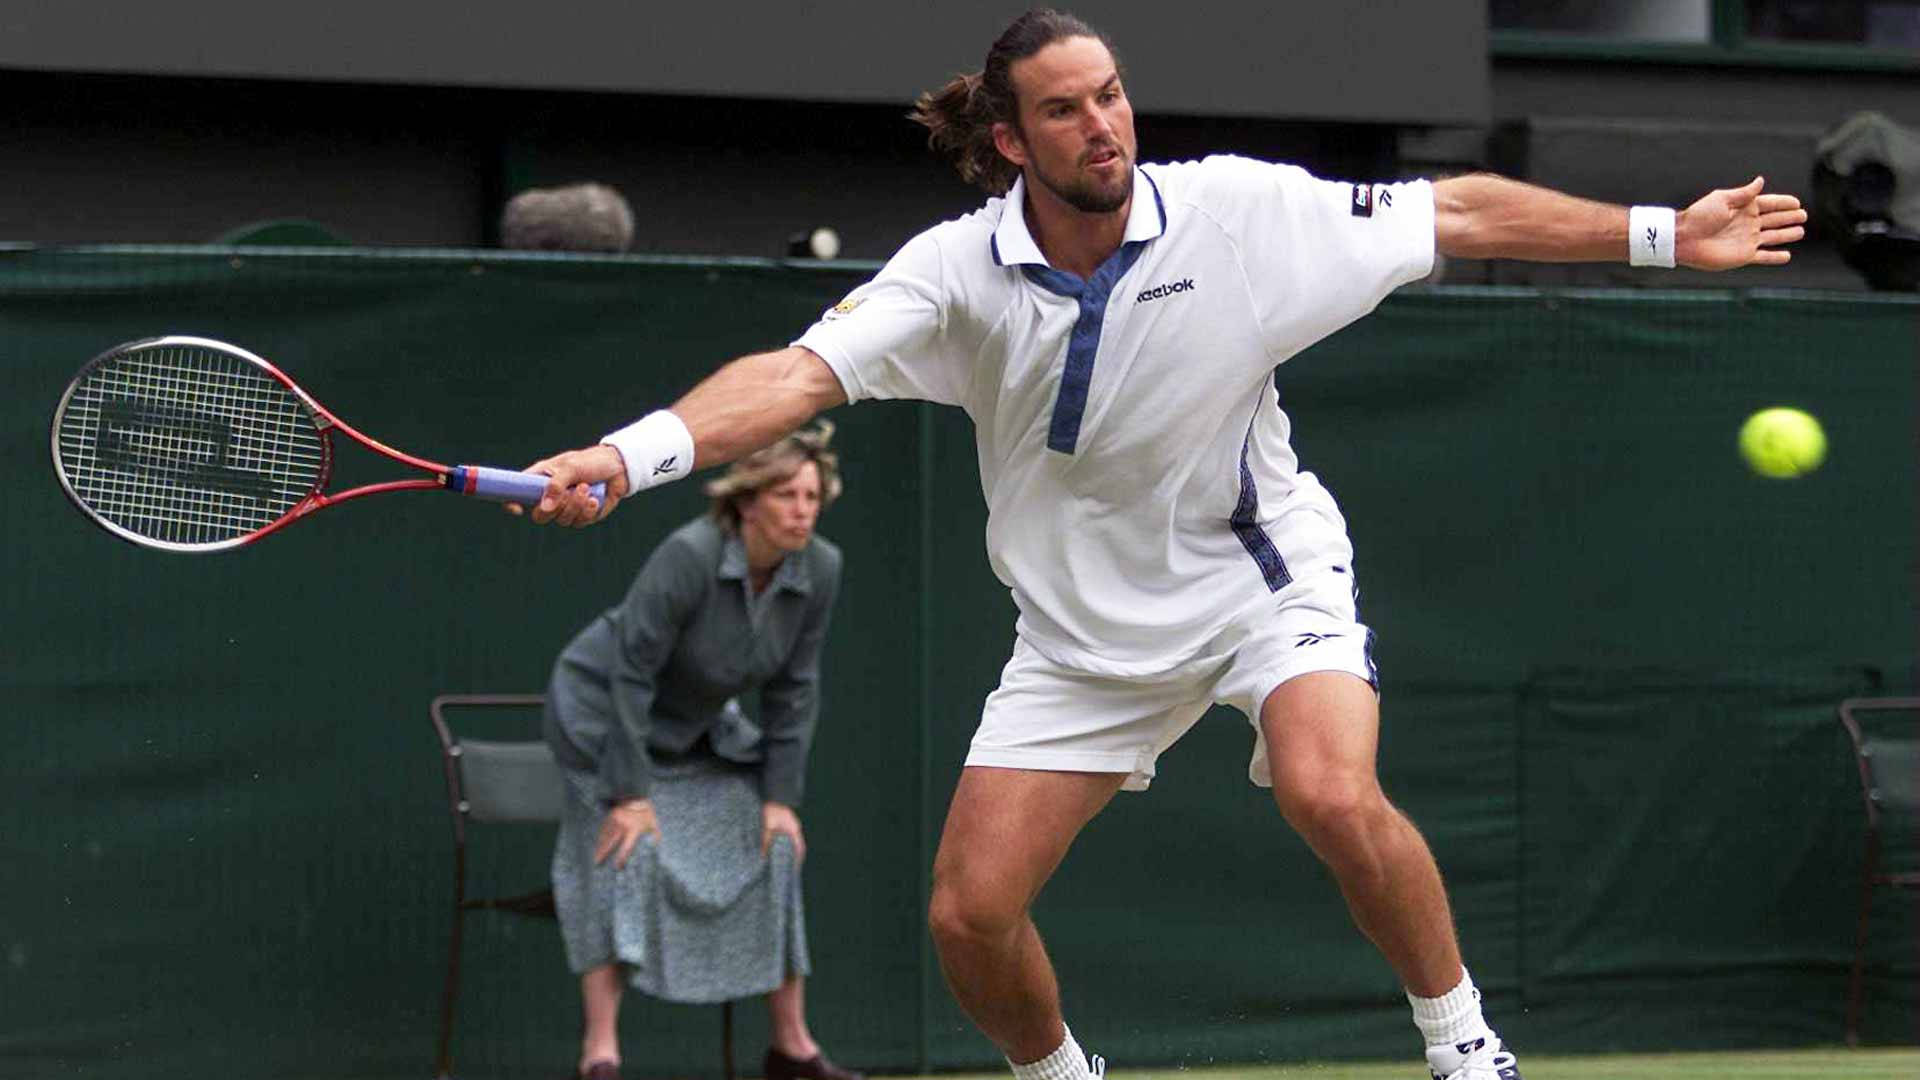 Patrick Rafter showcasing determination on the field Wallpaper